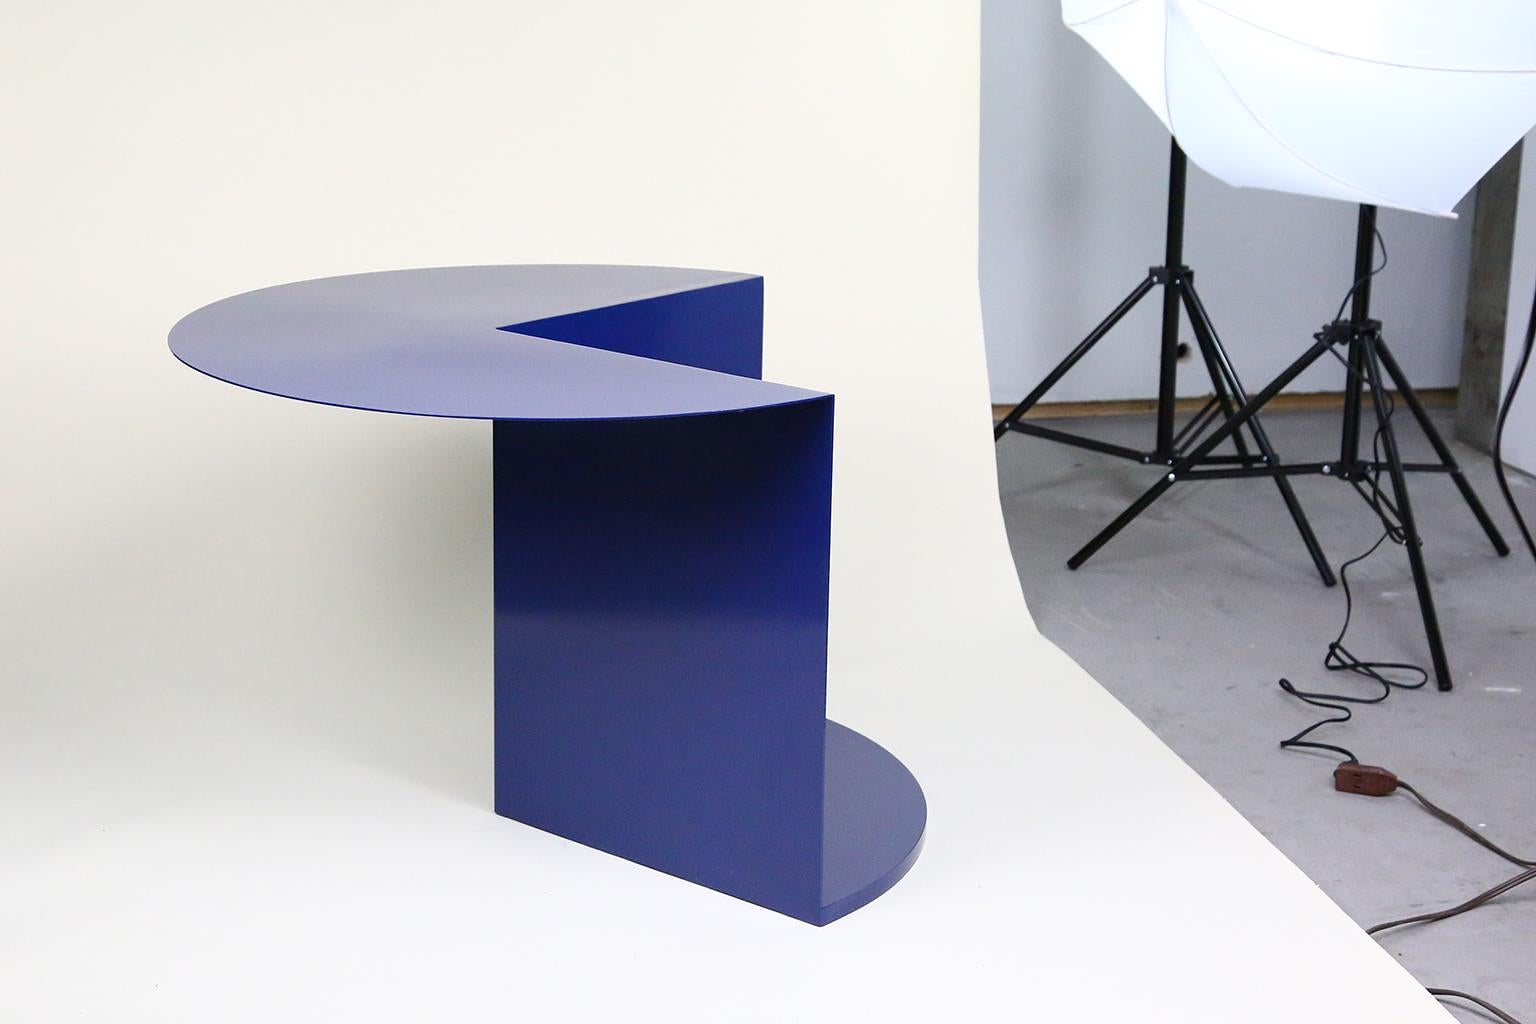 The coffee/side table consists of only necessary parts. The top panel functions as the surface of the table. The two vertical panels and the bottom surface create support for the table and suggest a space for the storage or display of personal